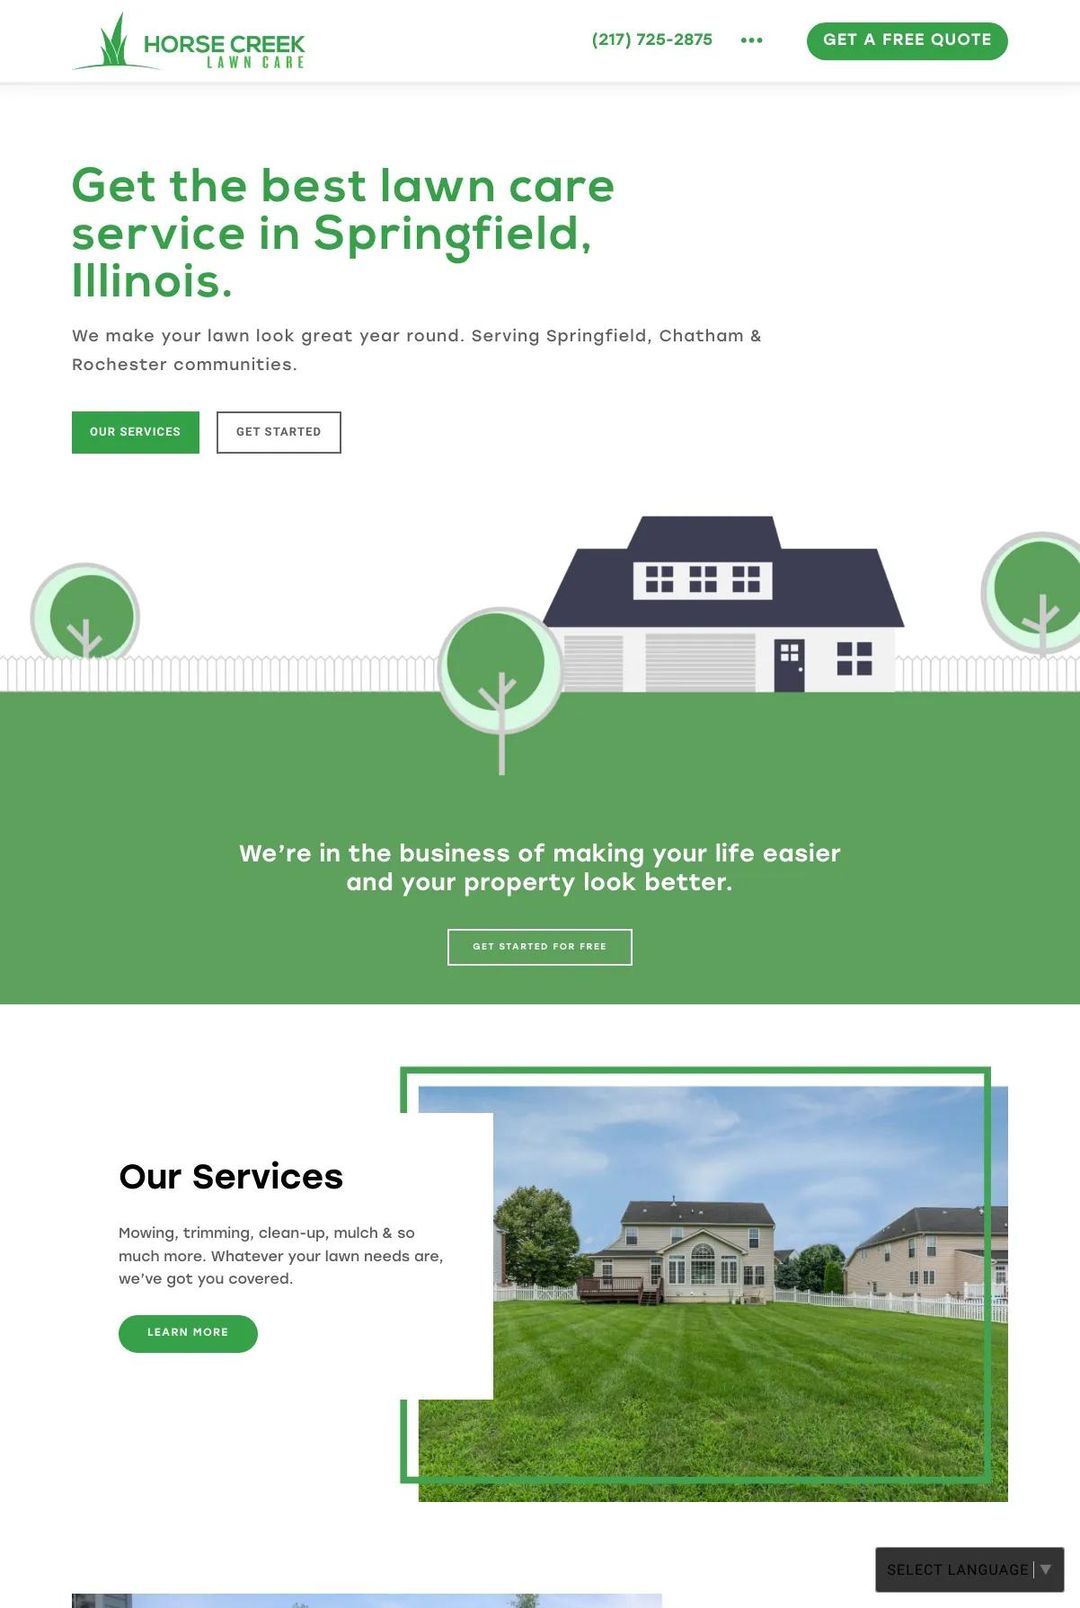 Screenshot 1 of Horse Creek Lawn Care (Example Squarespace Lawn Care Website)